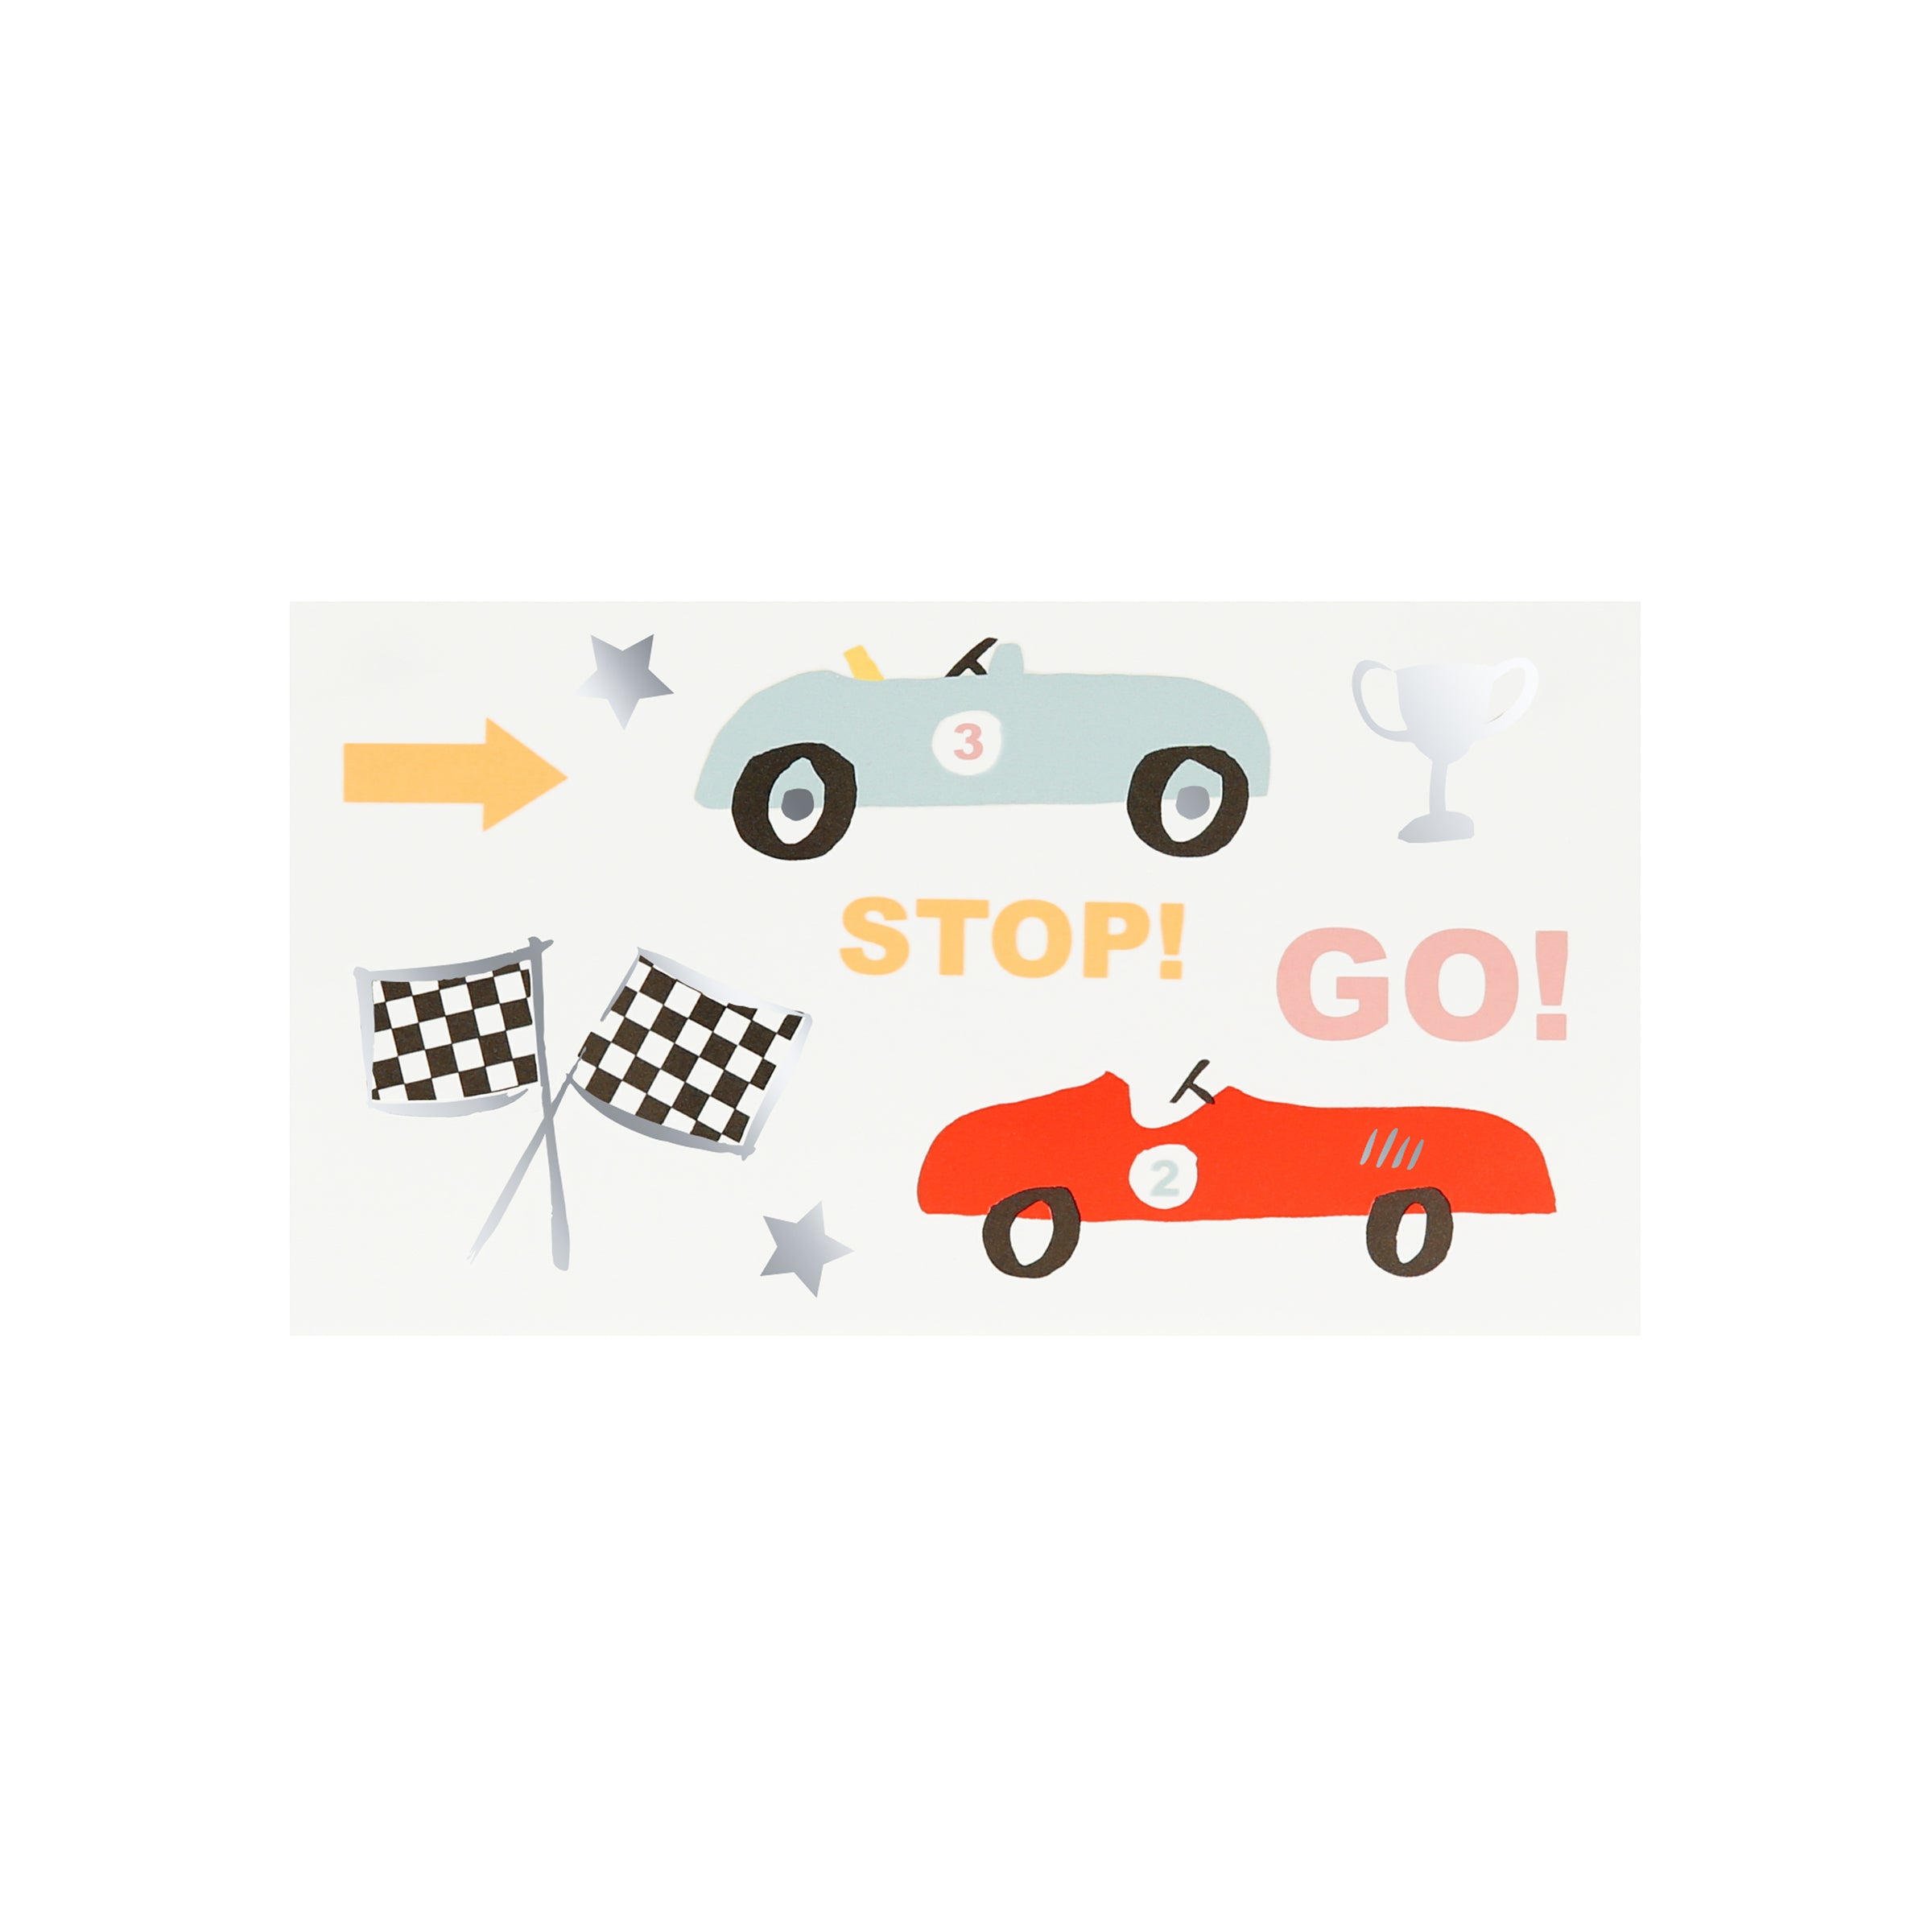 Kids love temporary tattoos and will be thrilled by these classic race car designs. Pop into party bags or share out as party favors.